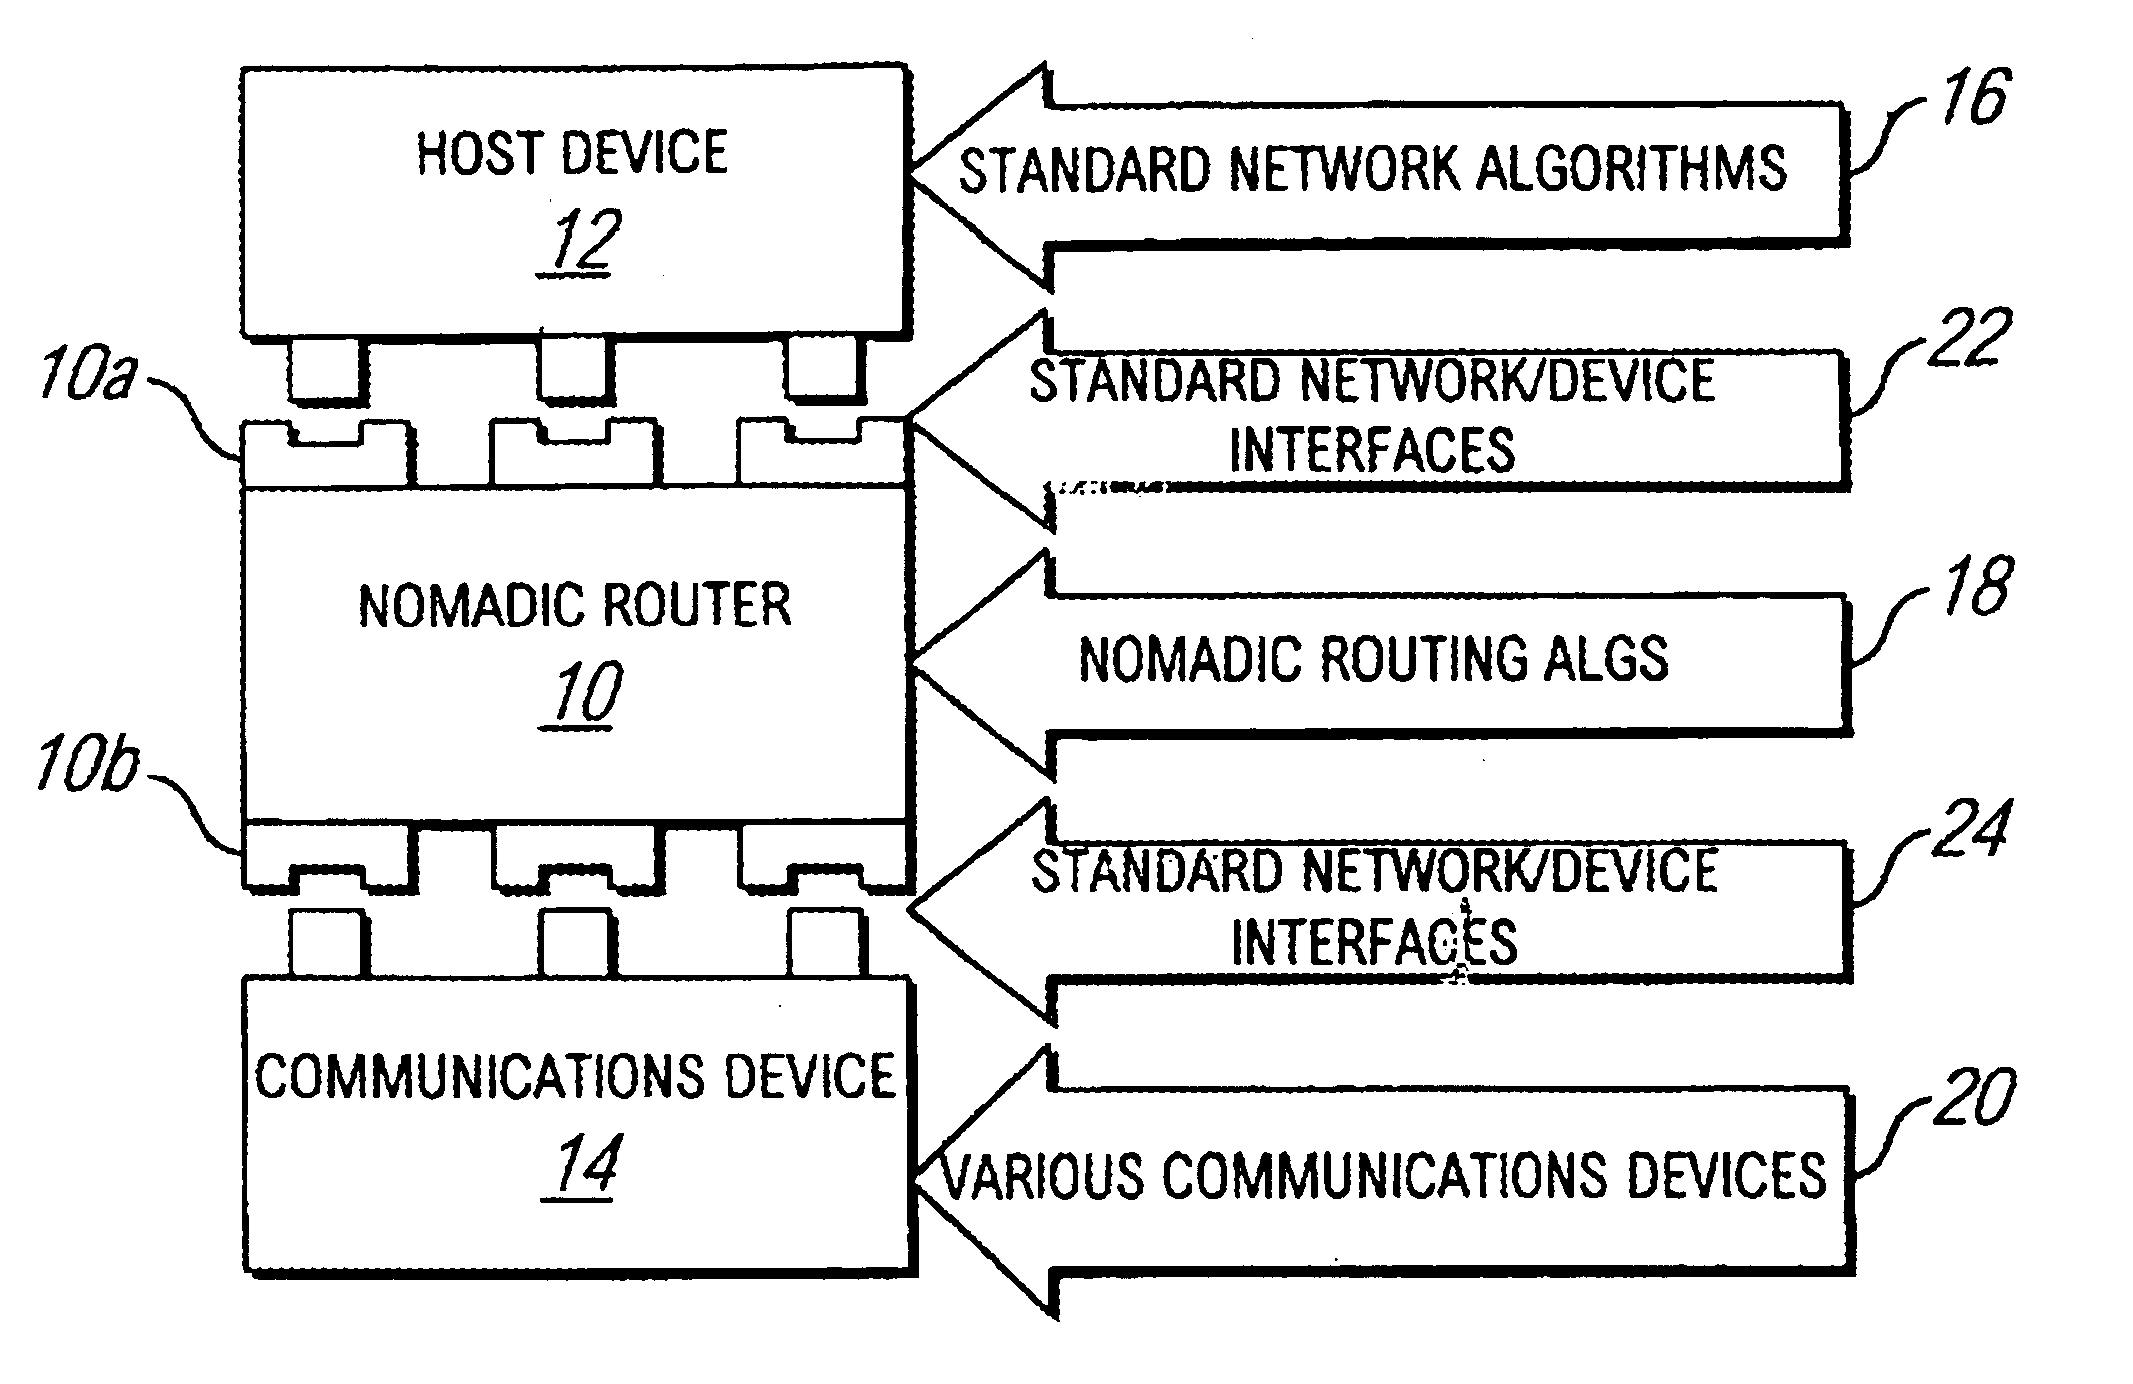 System and method for establishing network connection with unknown network and/or user device